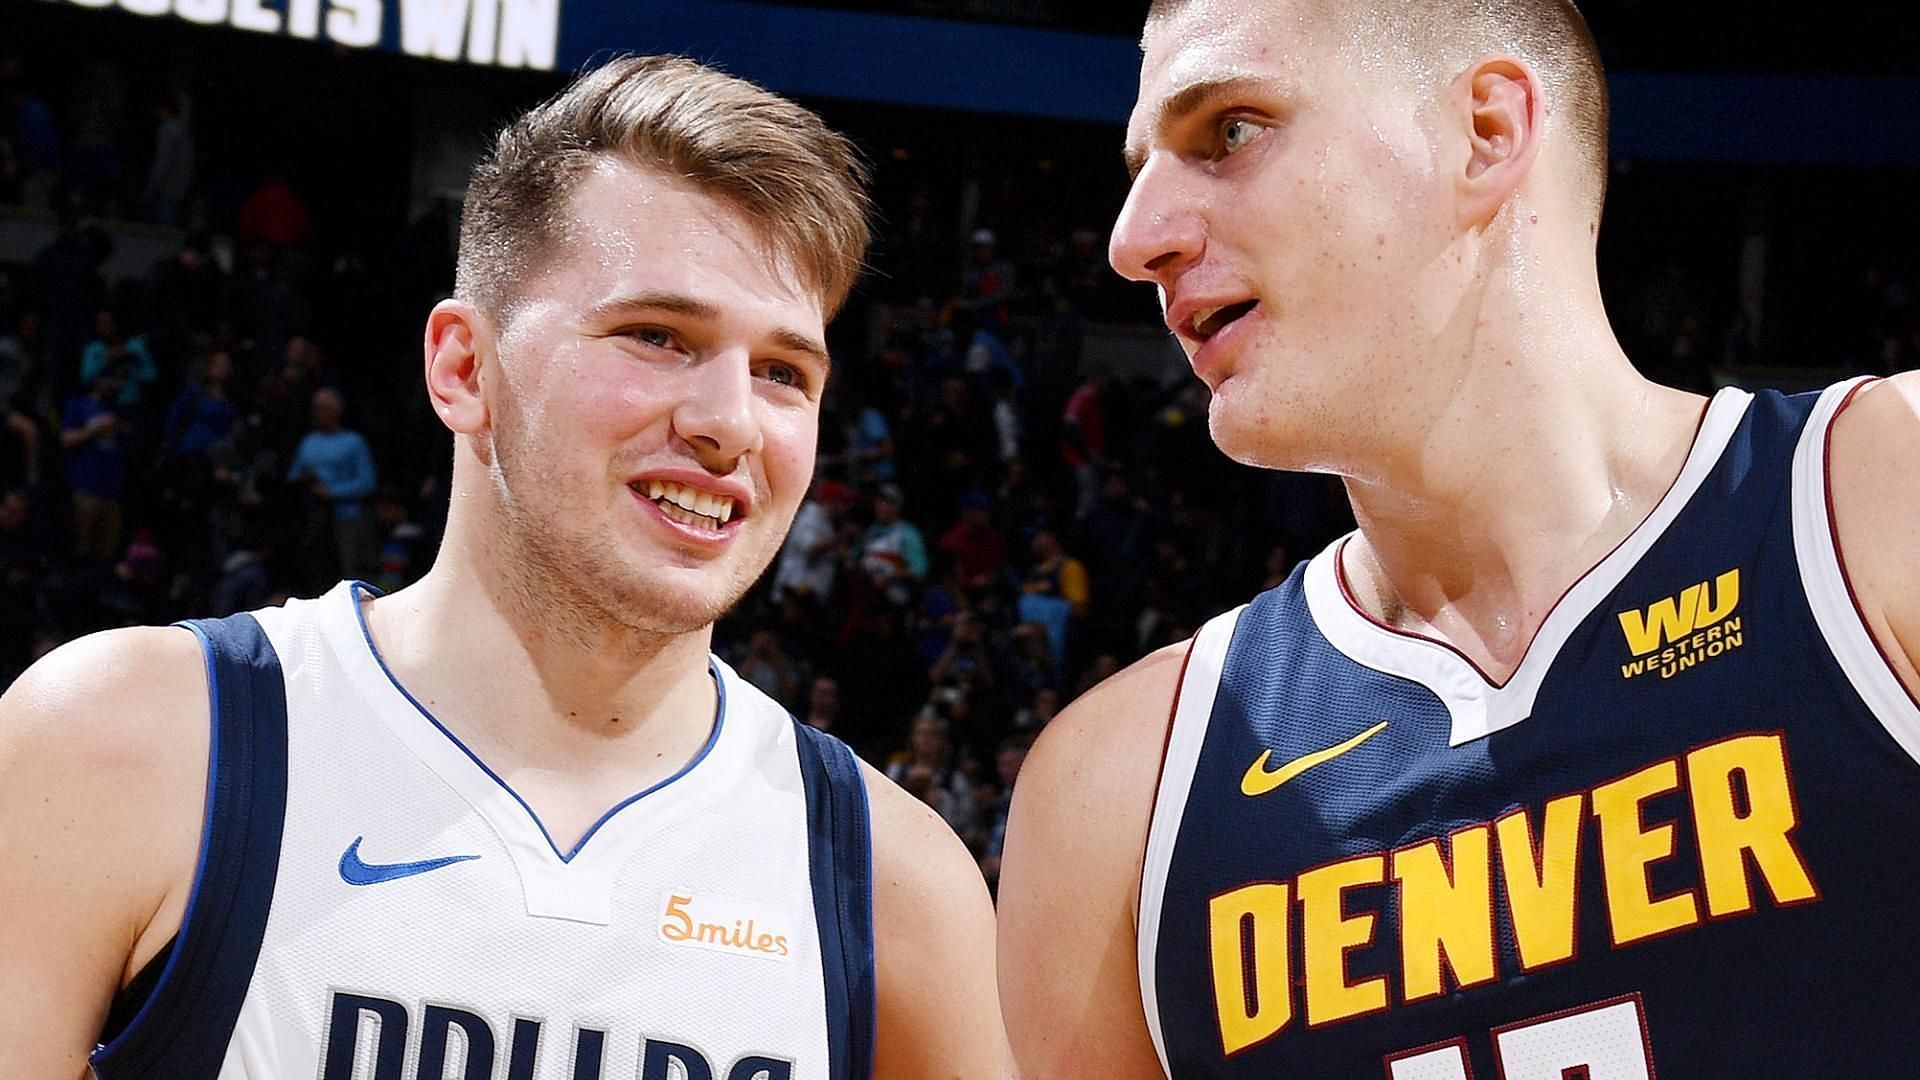 The Denver Nuggets and the Dallas Mavericks will meet for the second time this season on Monday. [Photo: Sport.ONE]